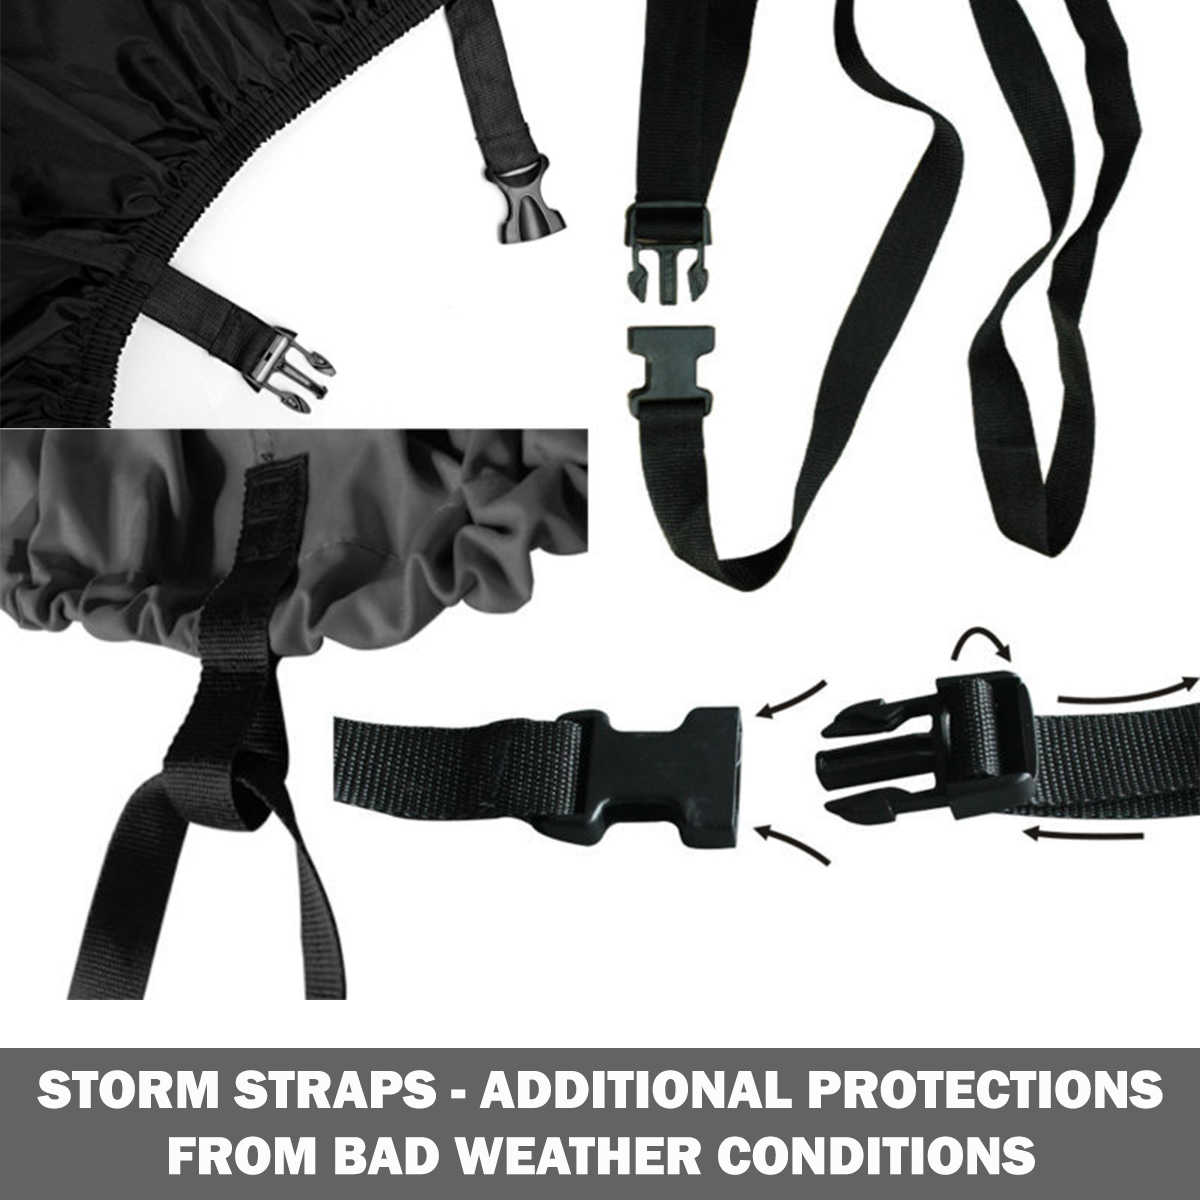 Widras Bicycle and Motorcycle Cover for Outdoor Storage Bike Heavy Duty Rip stop Material, Waterproof & Anti-UV Protection from All Weather Conditions for Mountain & Road Bikes